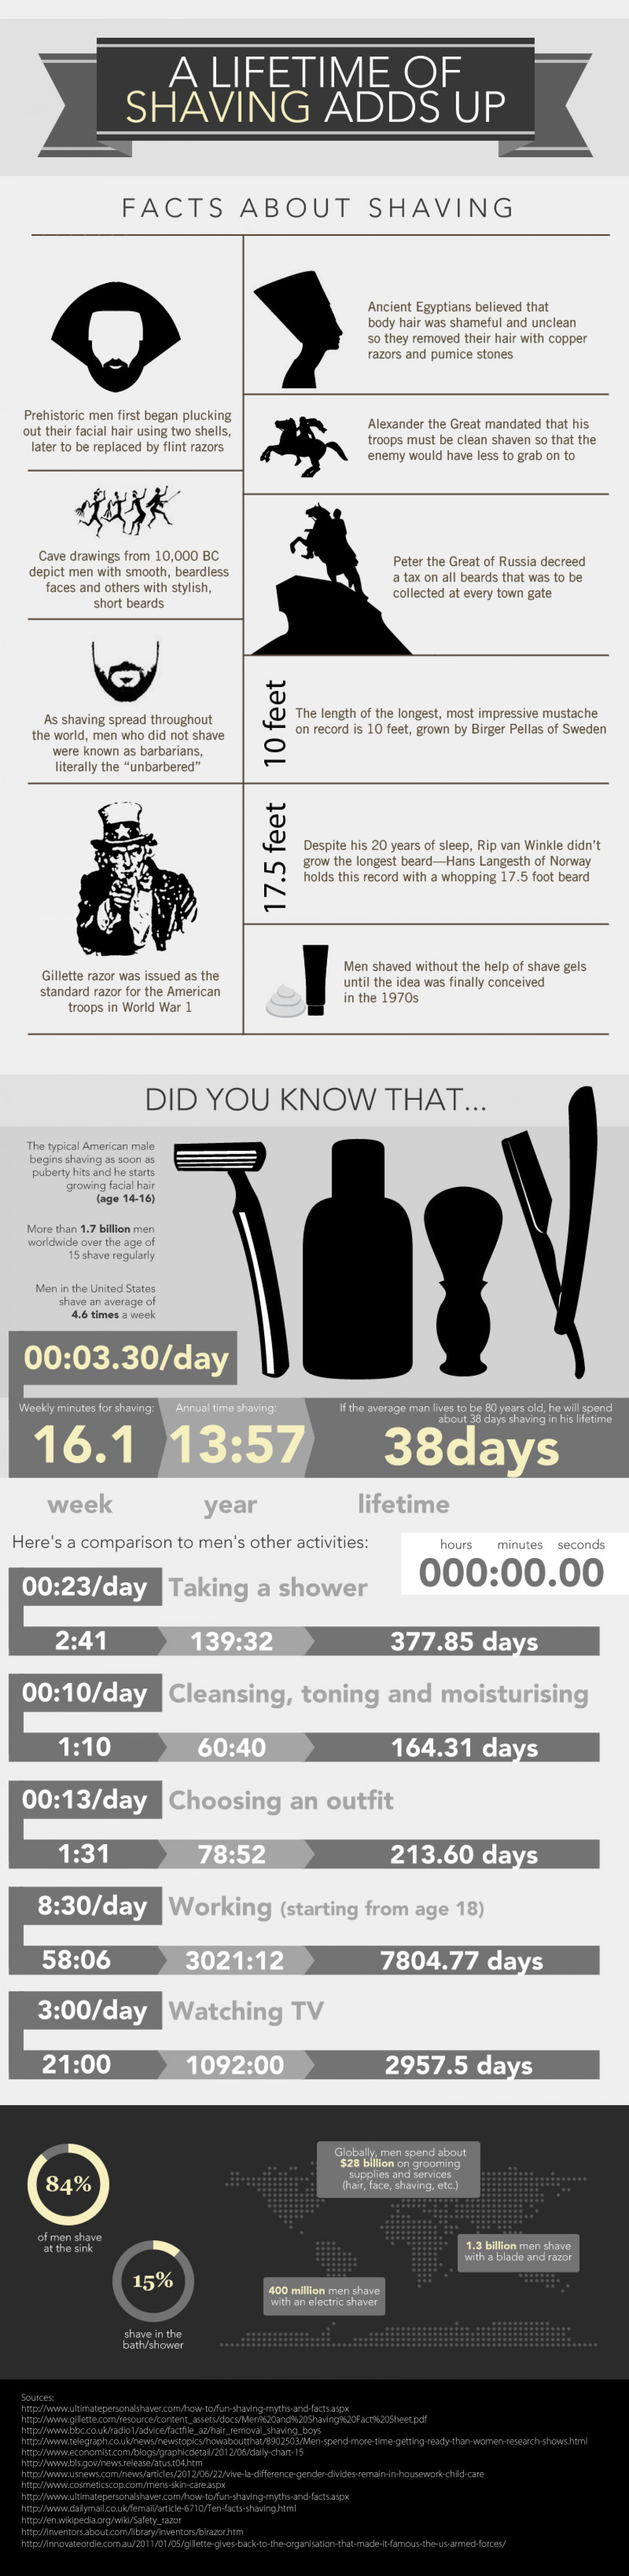 A lifetime of shaving adds up Infographic